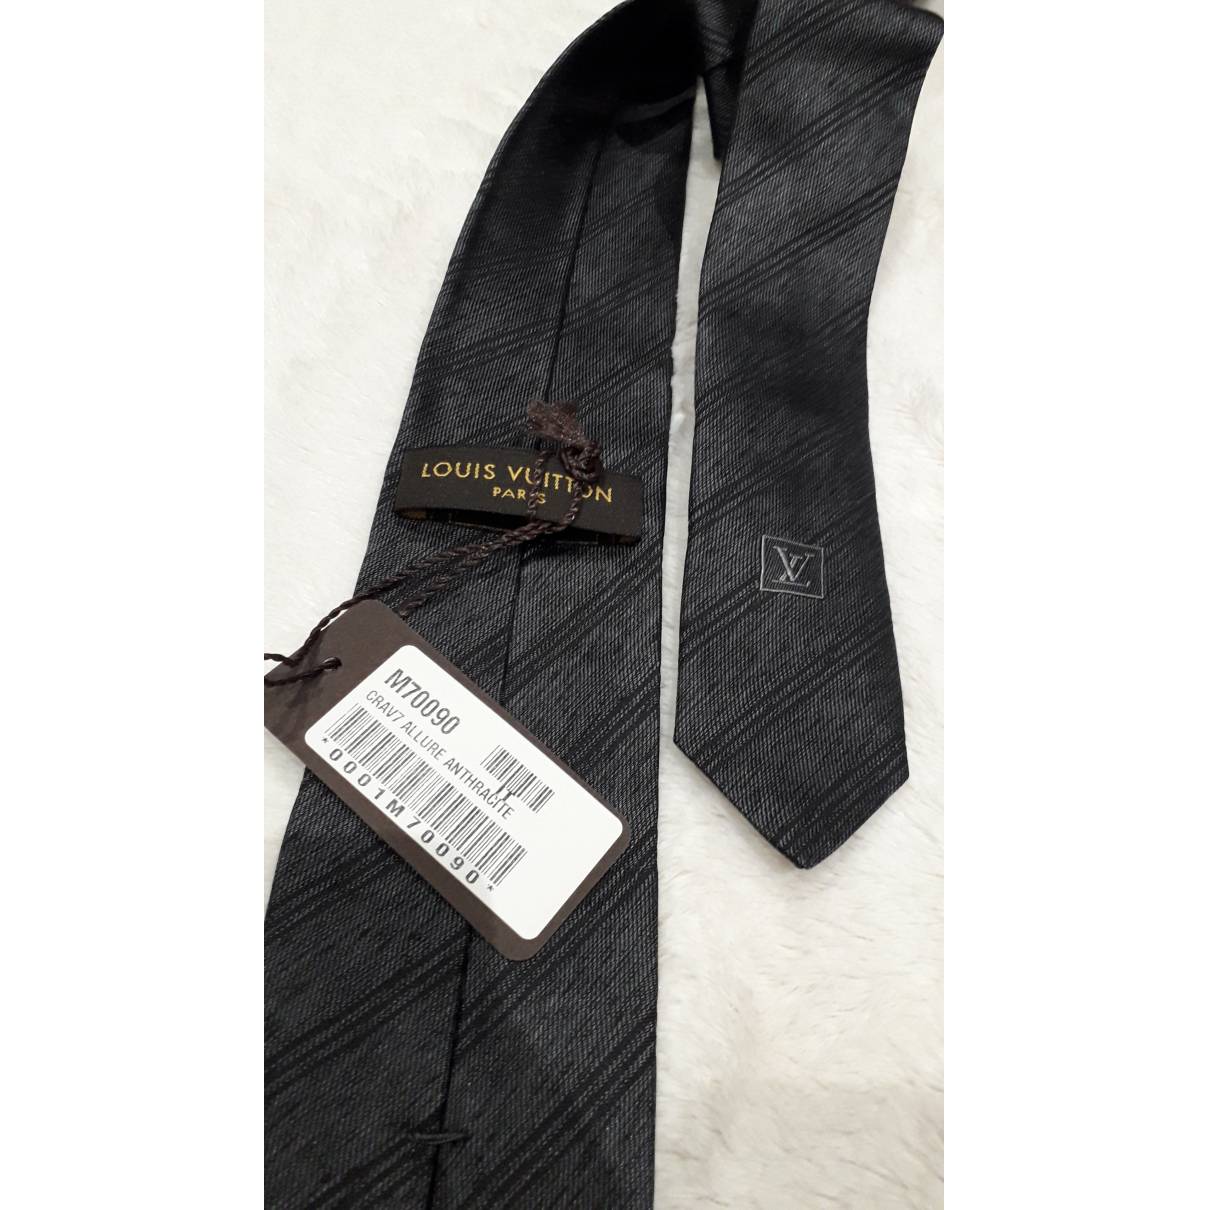 Louis Vuitton - Authenticated Tie - Silk Anthracite Striped for Men, Never Worn, with Tag